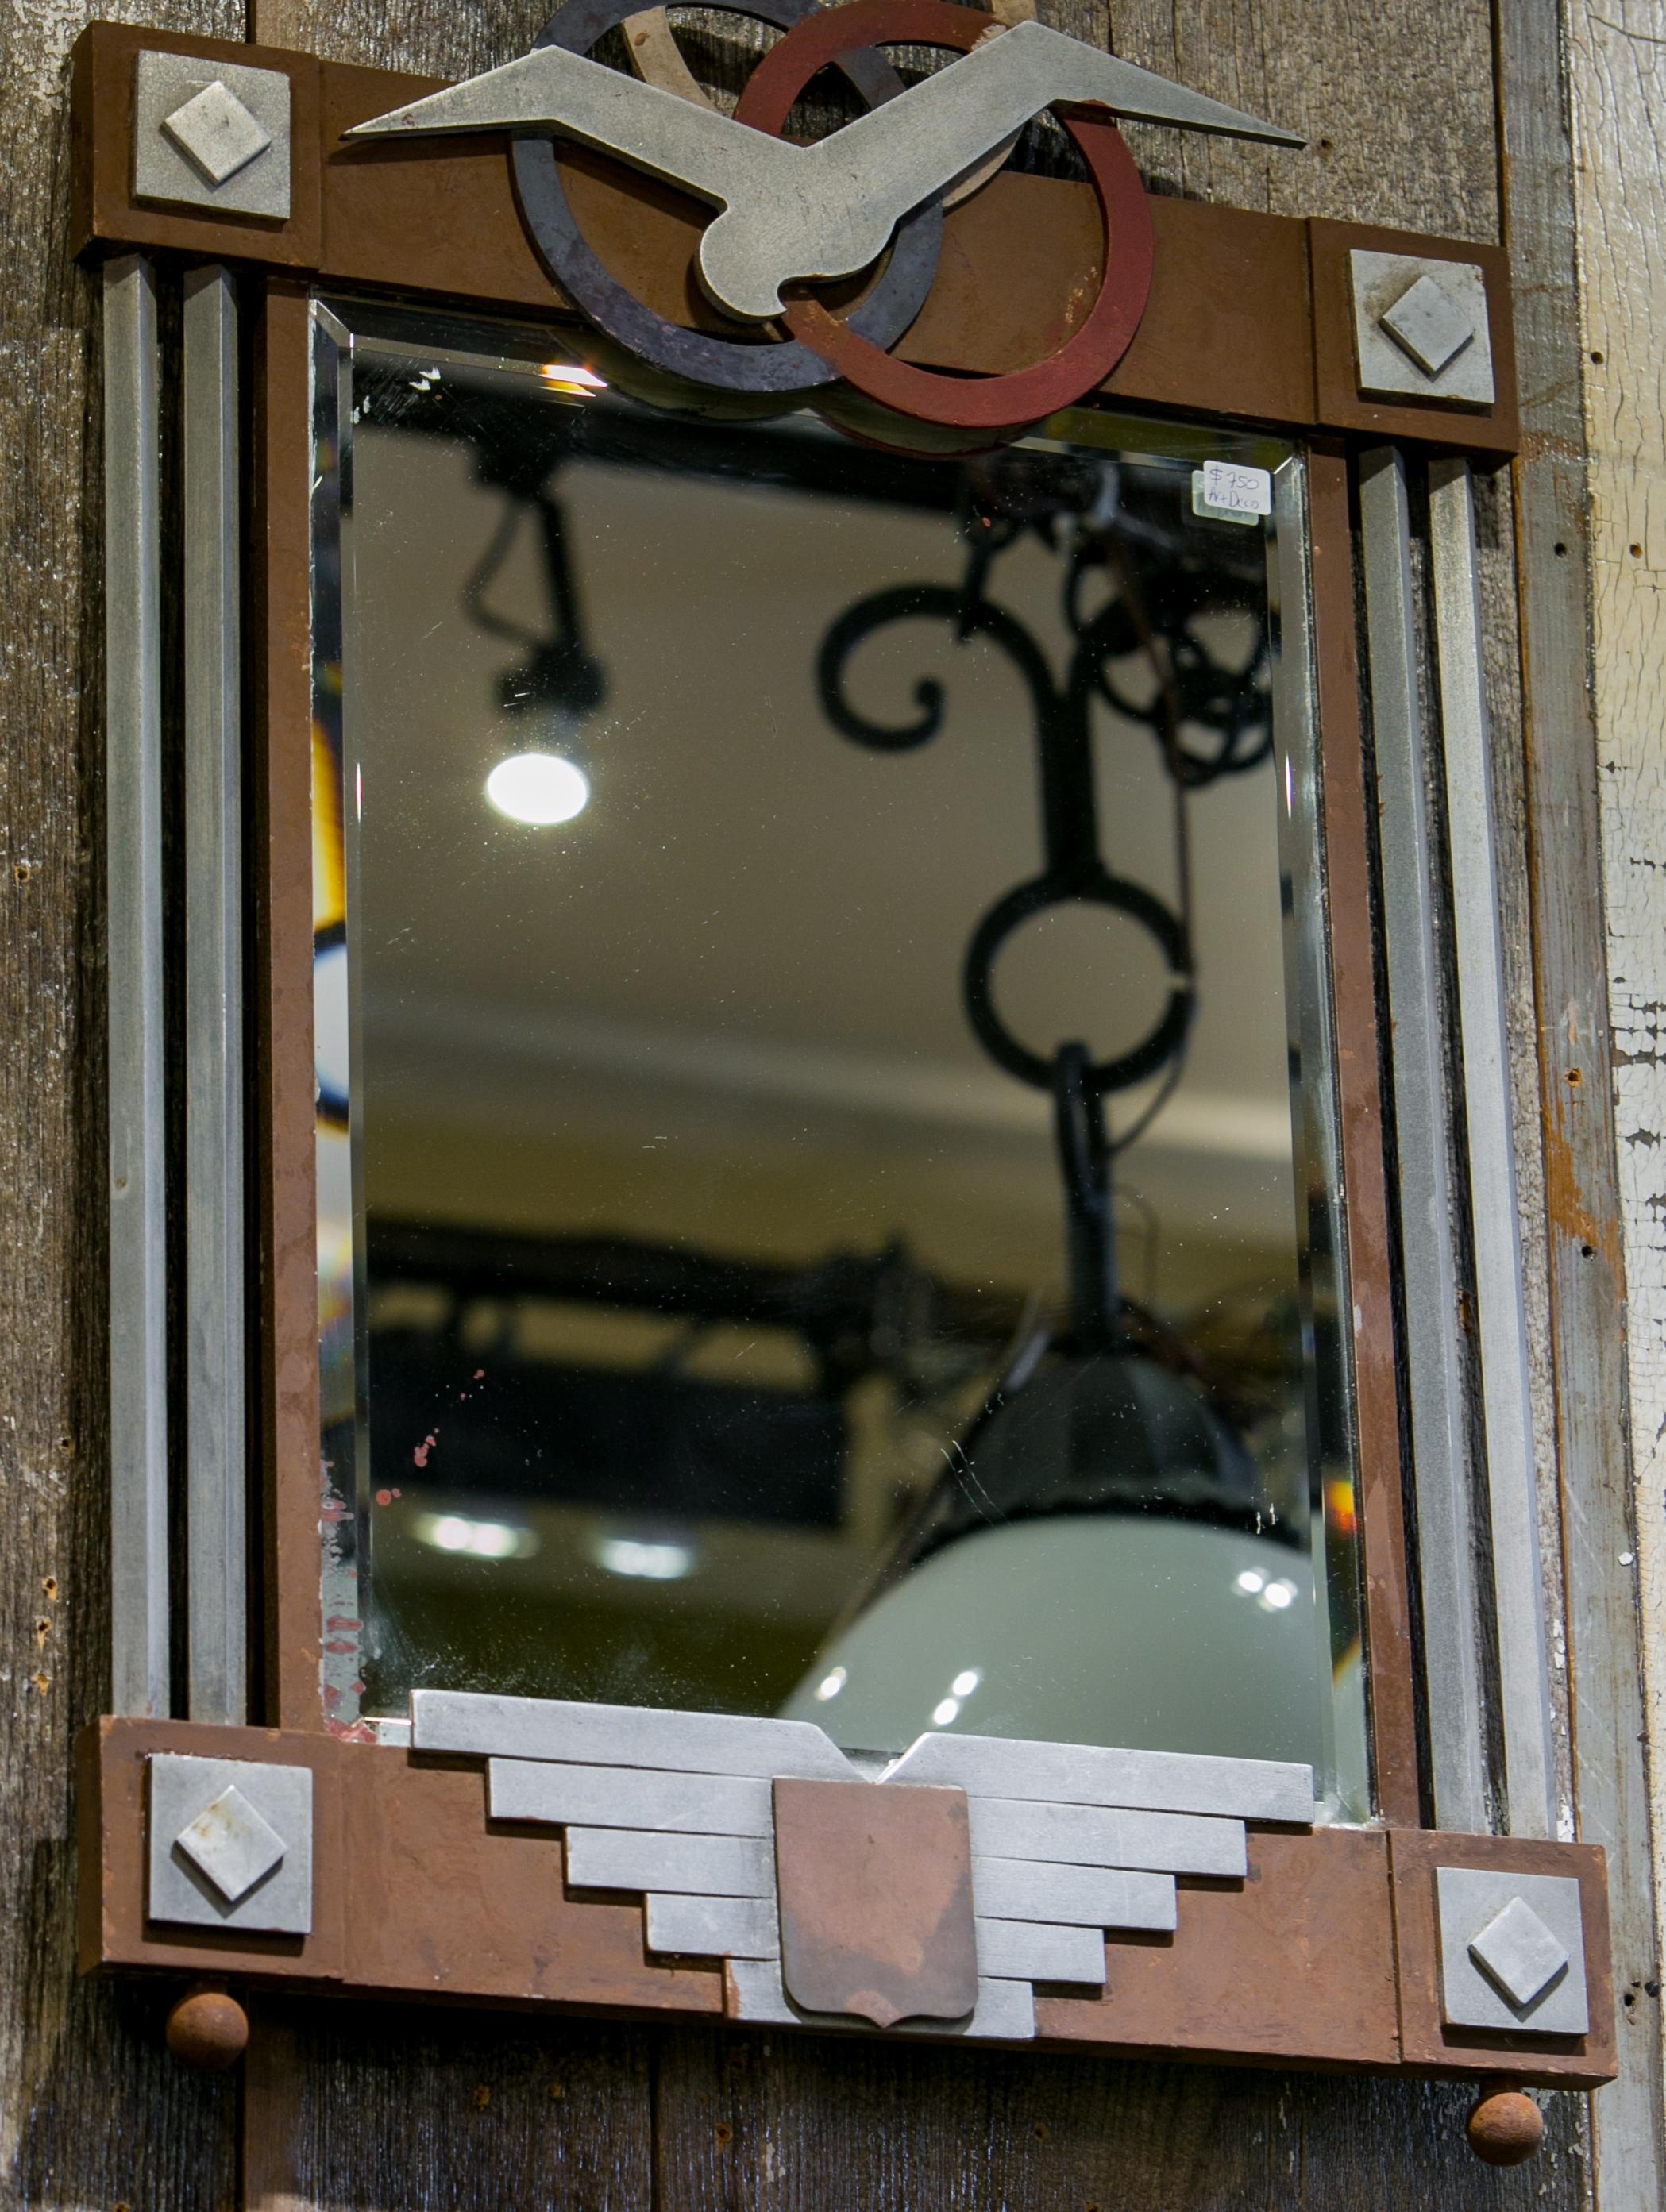 Art Deco mirror with wood and aluminum frame. The mirror is such a classic Art Deco piece. Its colors are silver and oxblood with a bit of blue. The mirror is original and shows some natural distressing.